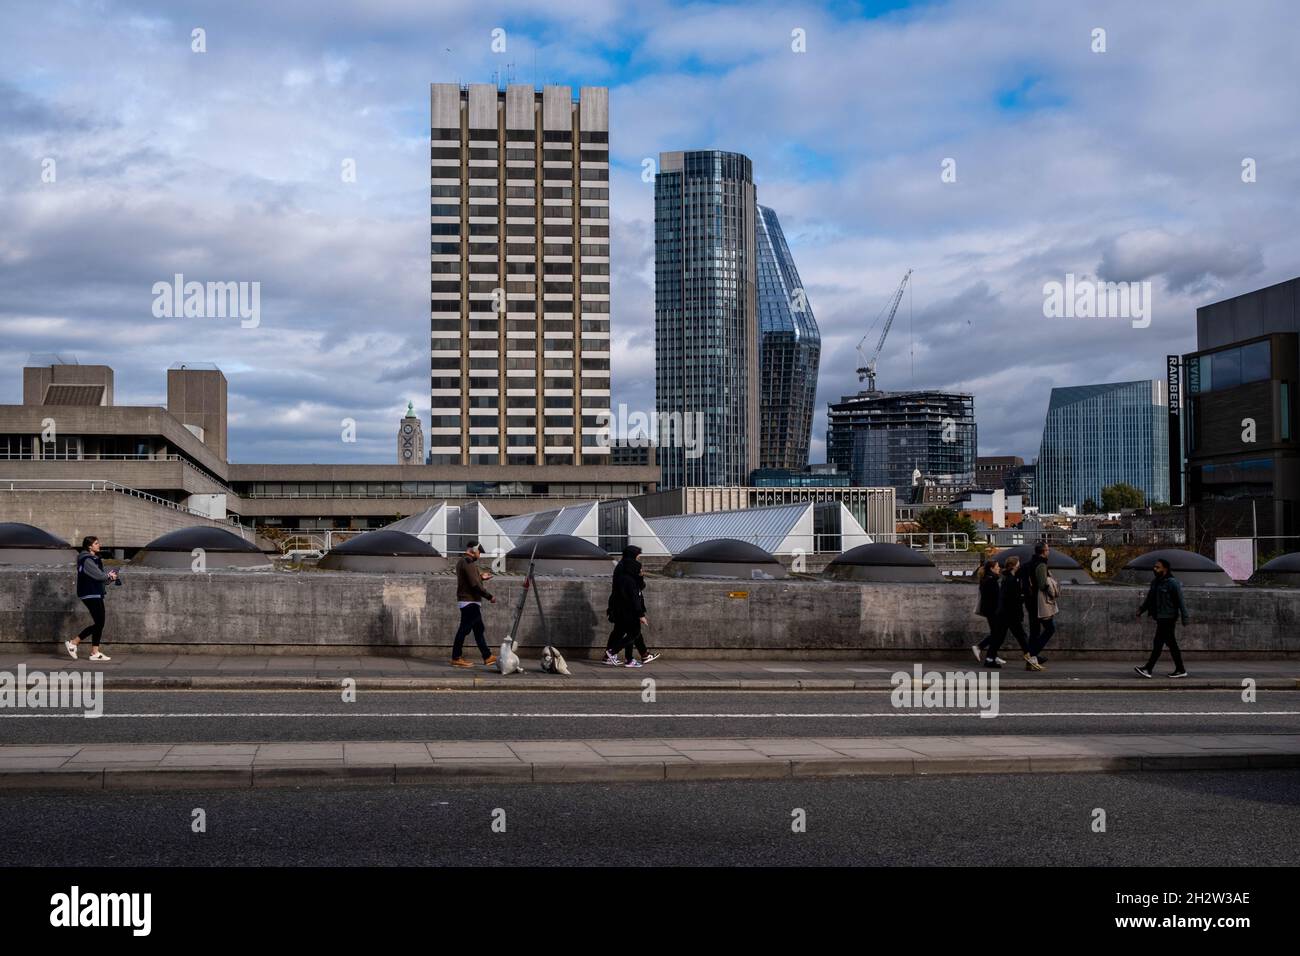 High Rise Property Development In South Bank Londong England UK From WaterlooBridge Stock Photo